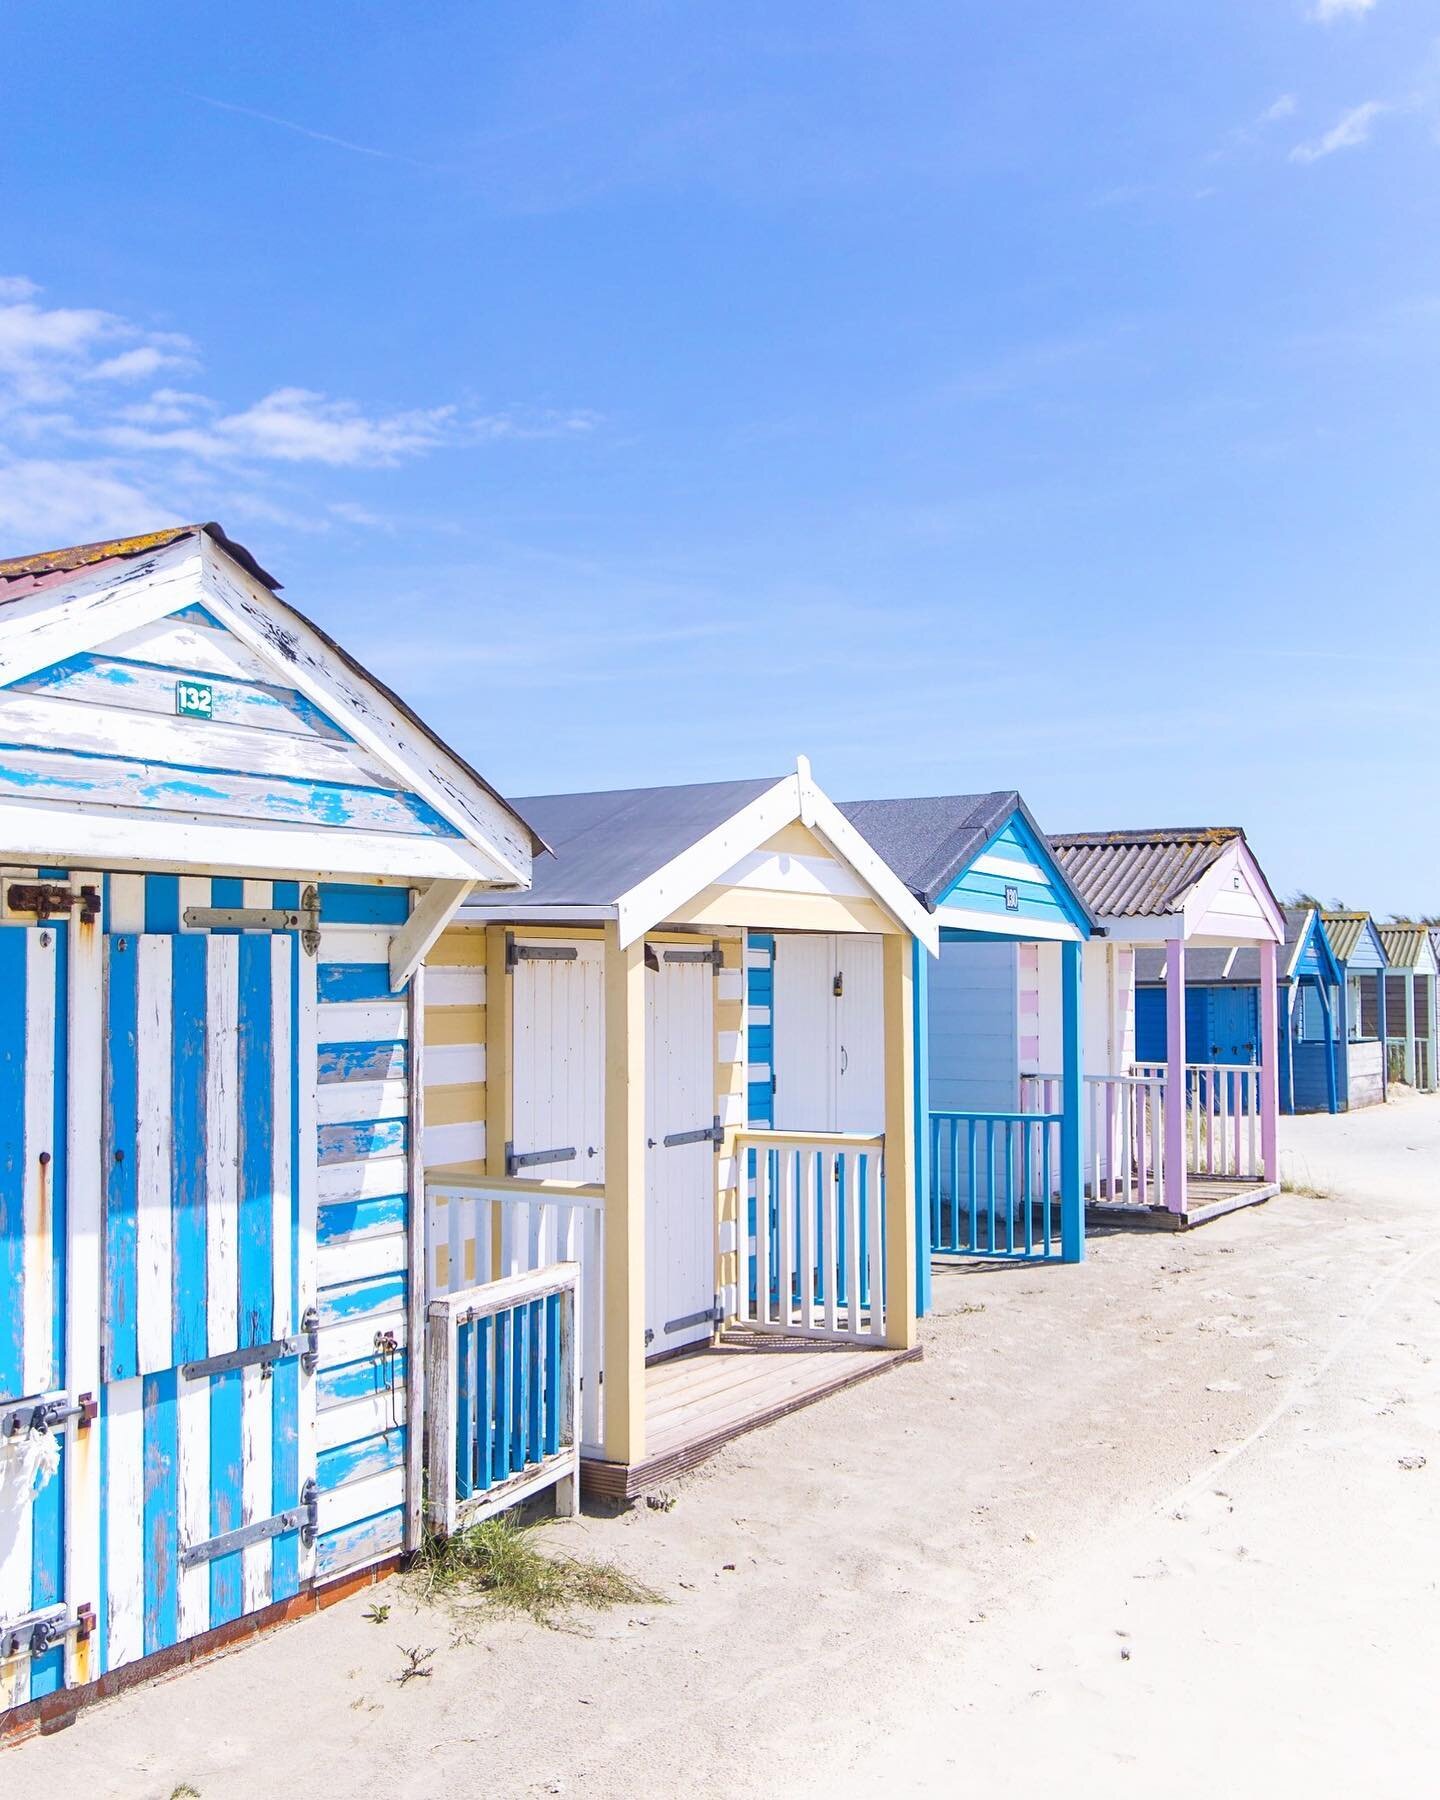 Beach hut beauties at West Wittering ♡ We spent a glorious day at West Wittering a few weeks ago sans the 🐶 so got to see the beach huts and sit on the lovely part of the beach you can&rsquo;t take dogs to. I took far too many photos as always :) So